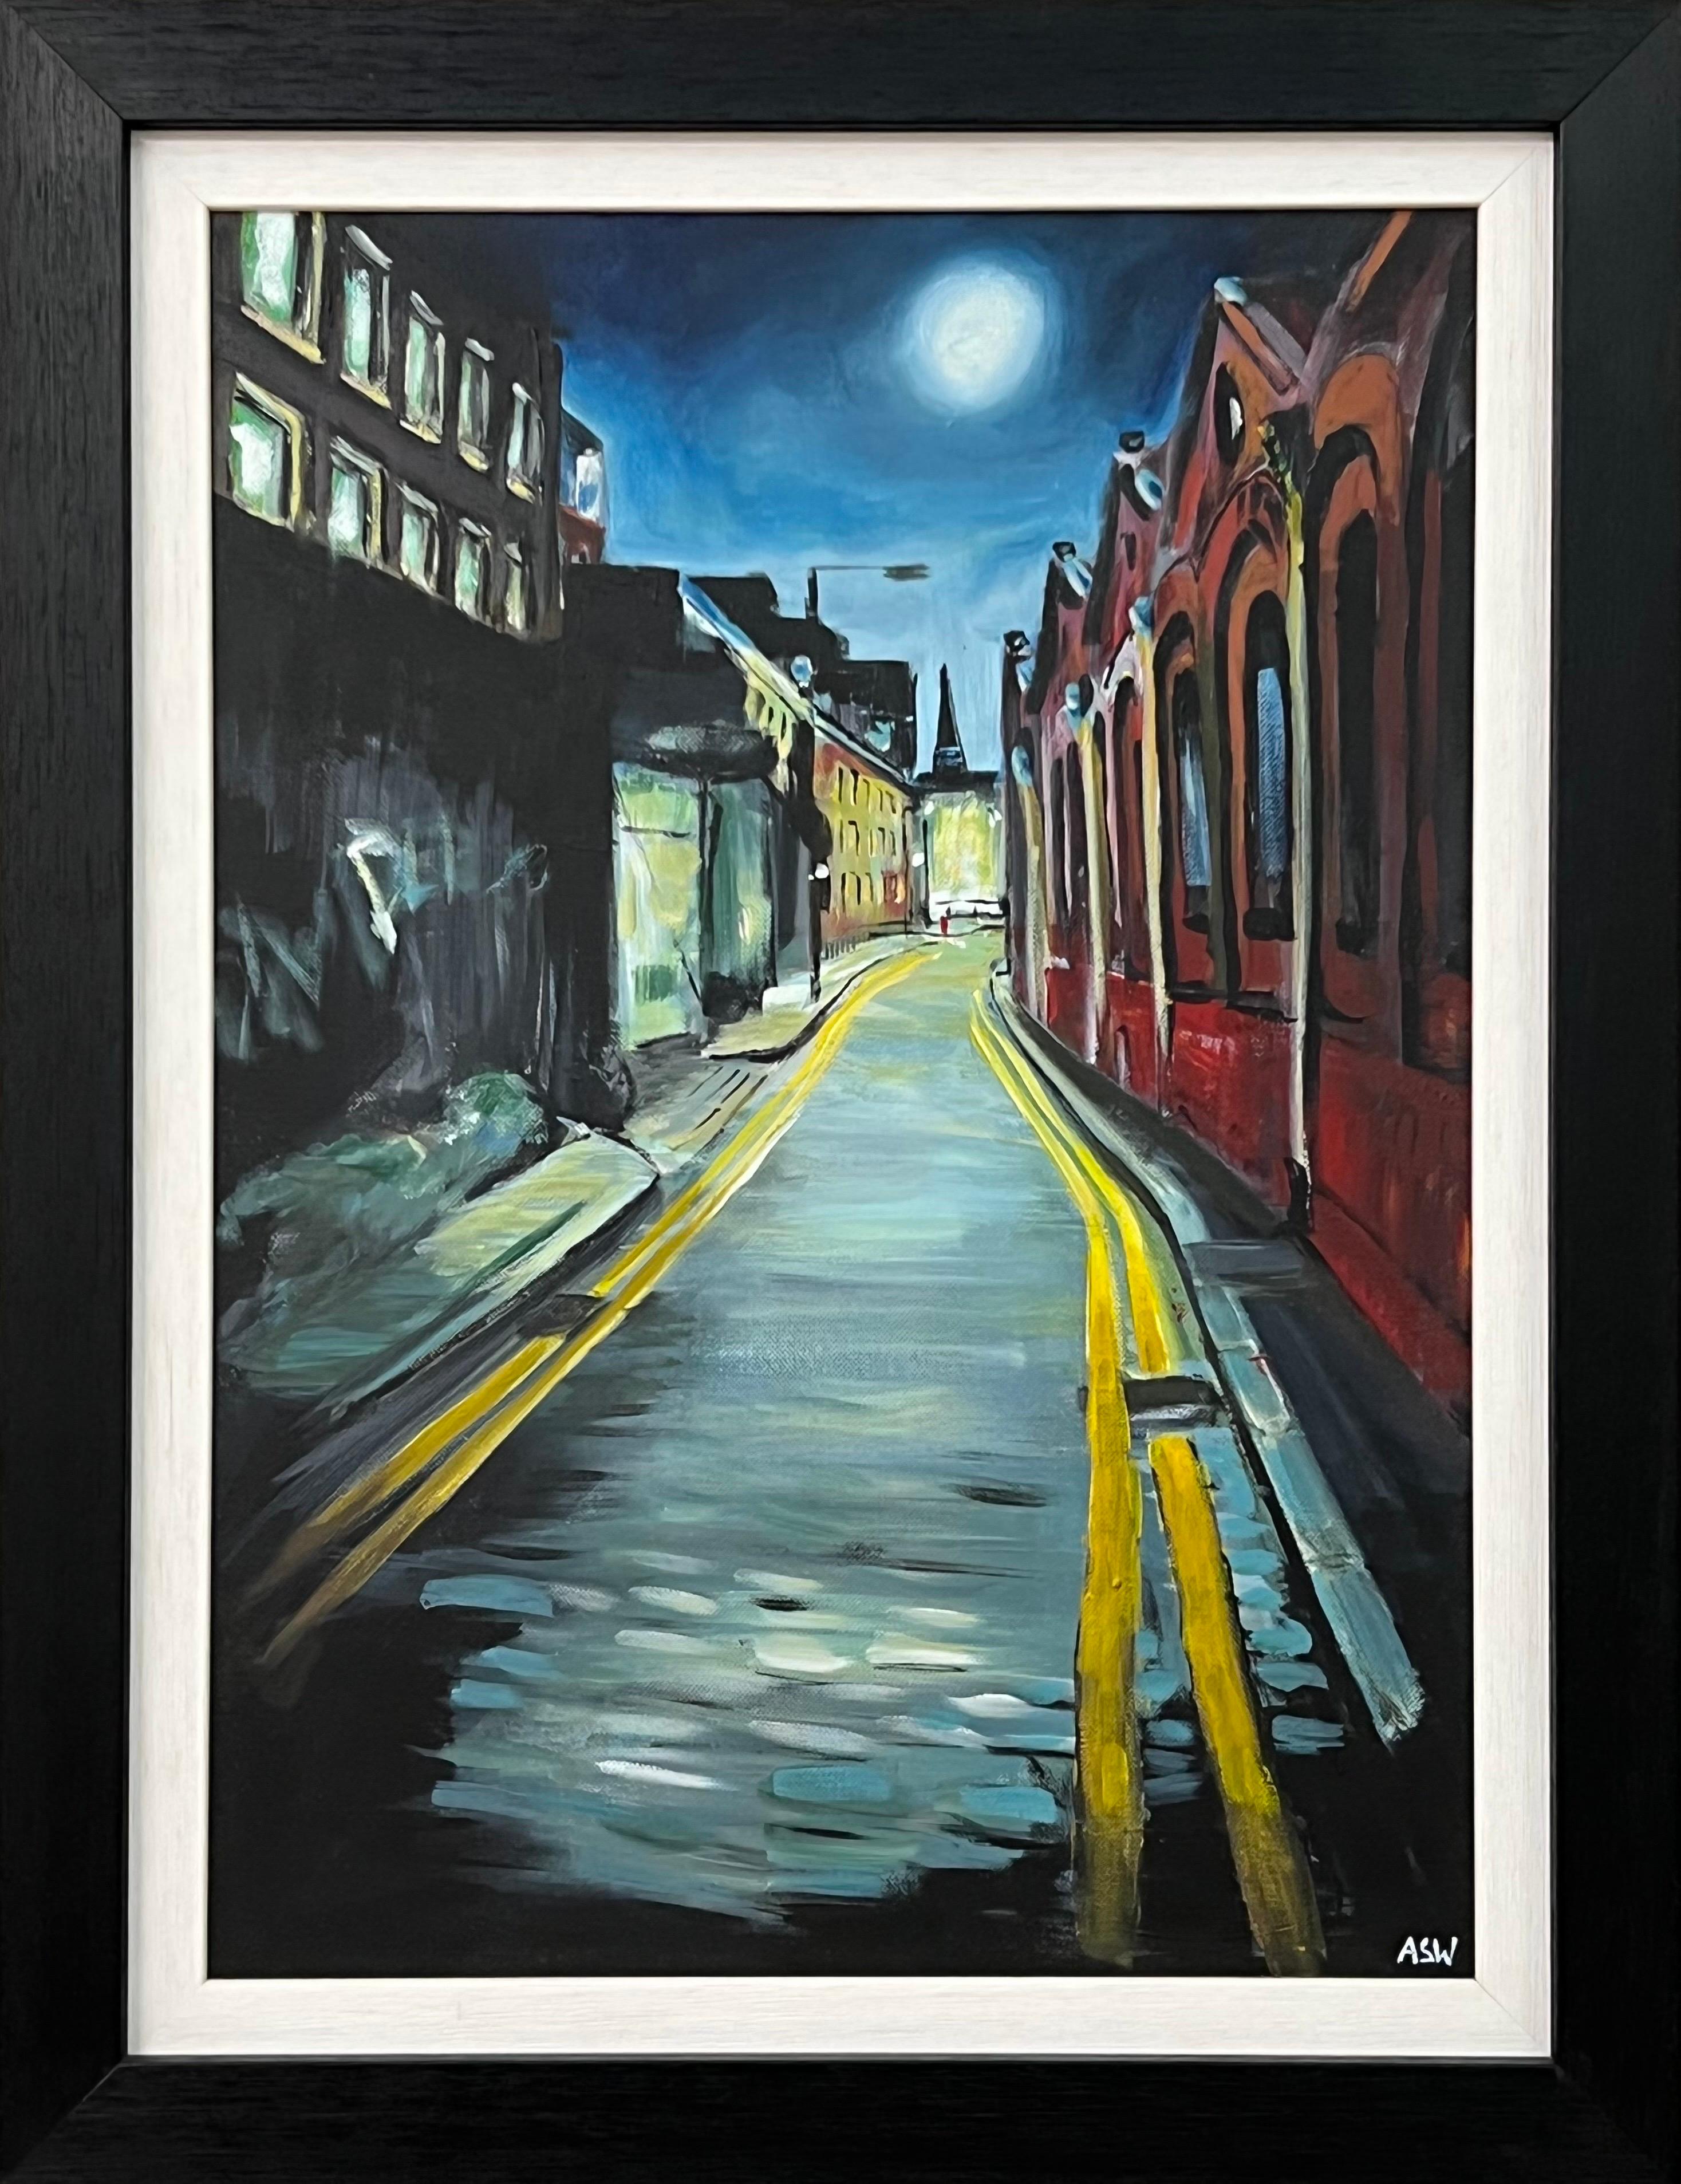 Atmospheric Painting of Street in Whitechapel London City by British Artist - Mixed Media Art by Angela Wakefield